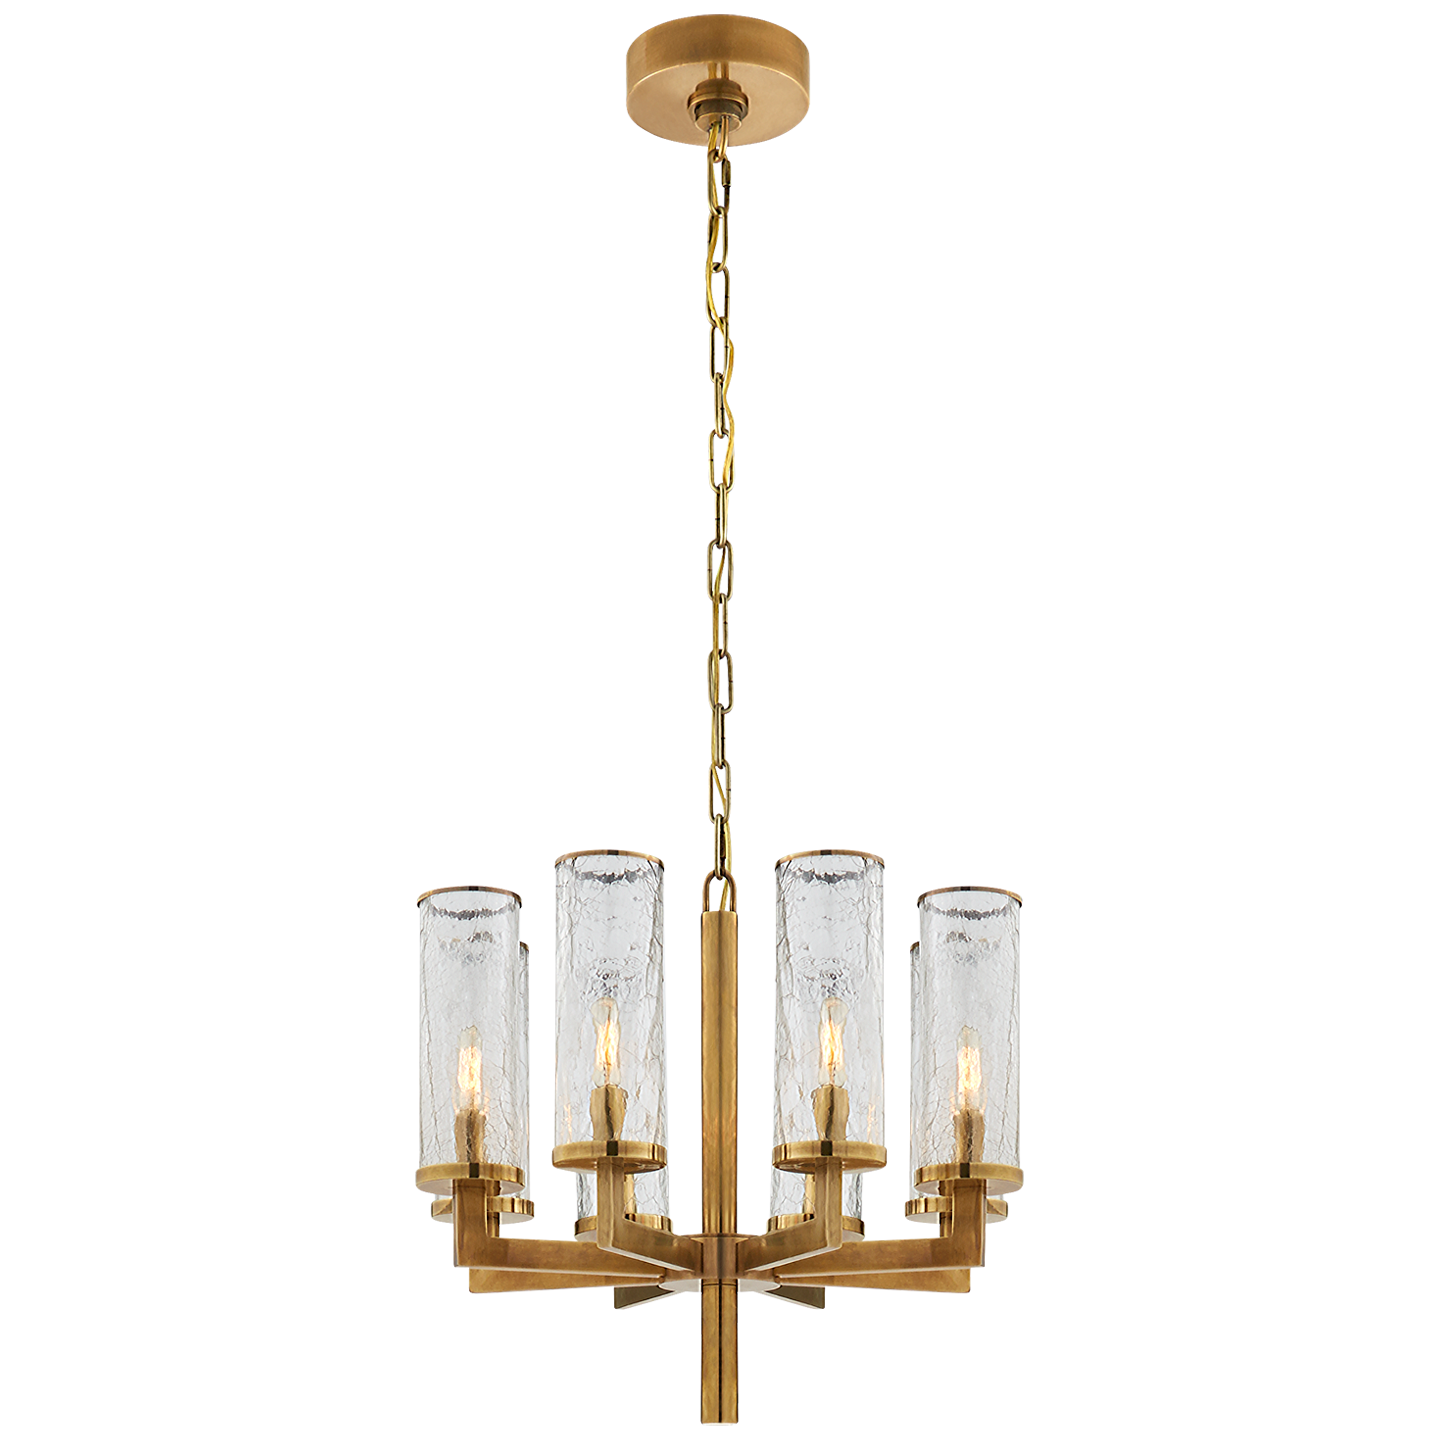 Simple Liaison Chandelier - Brass and Cracked Glass 